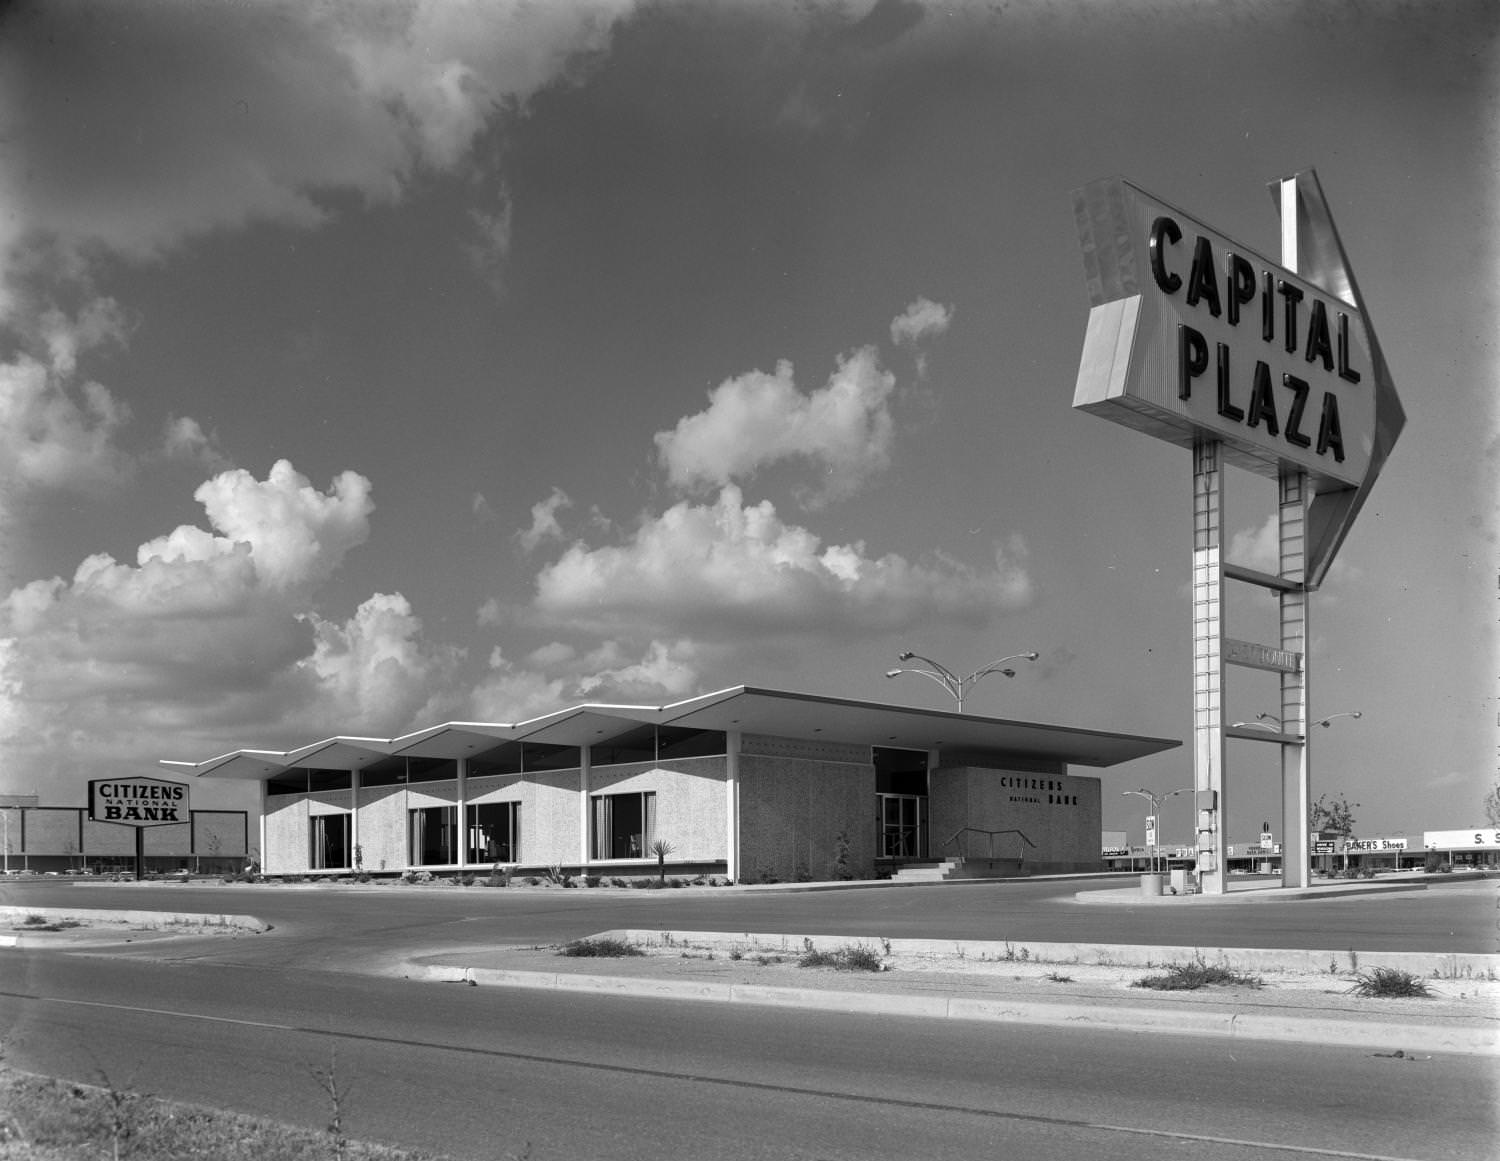 Citizens National Bank at Capital Plaza in Austin, Texas, 1961